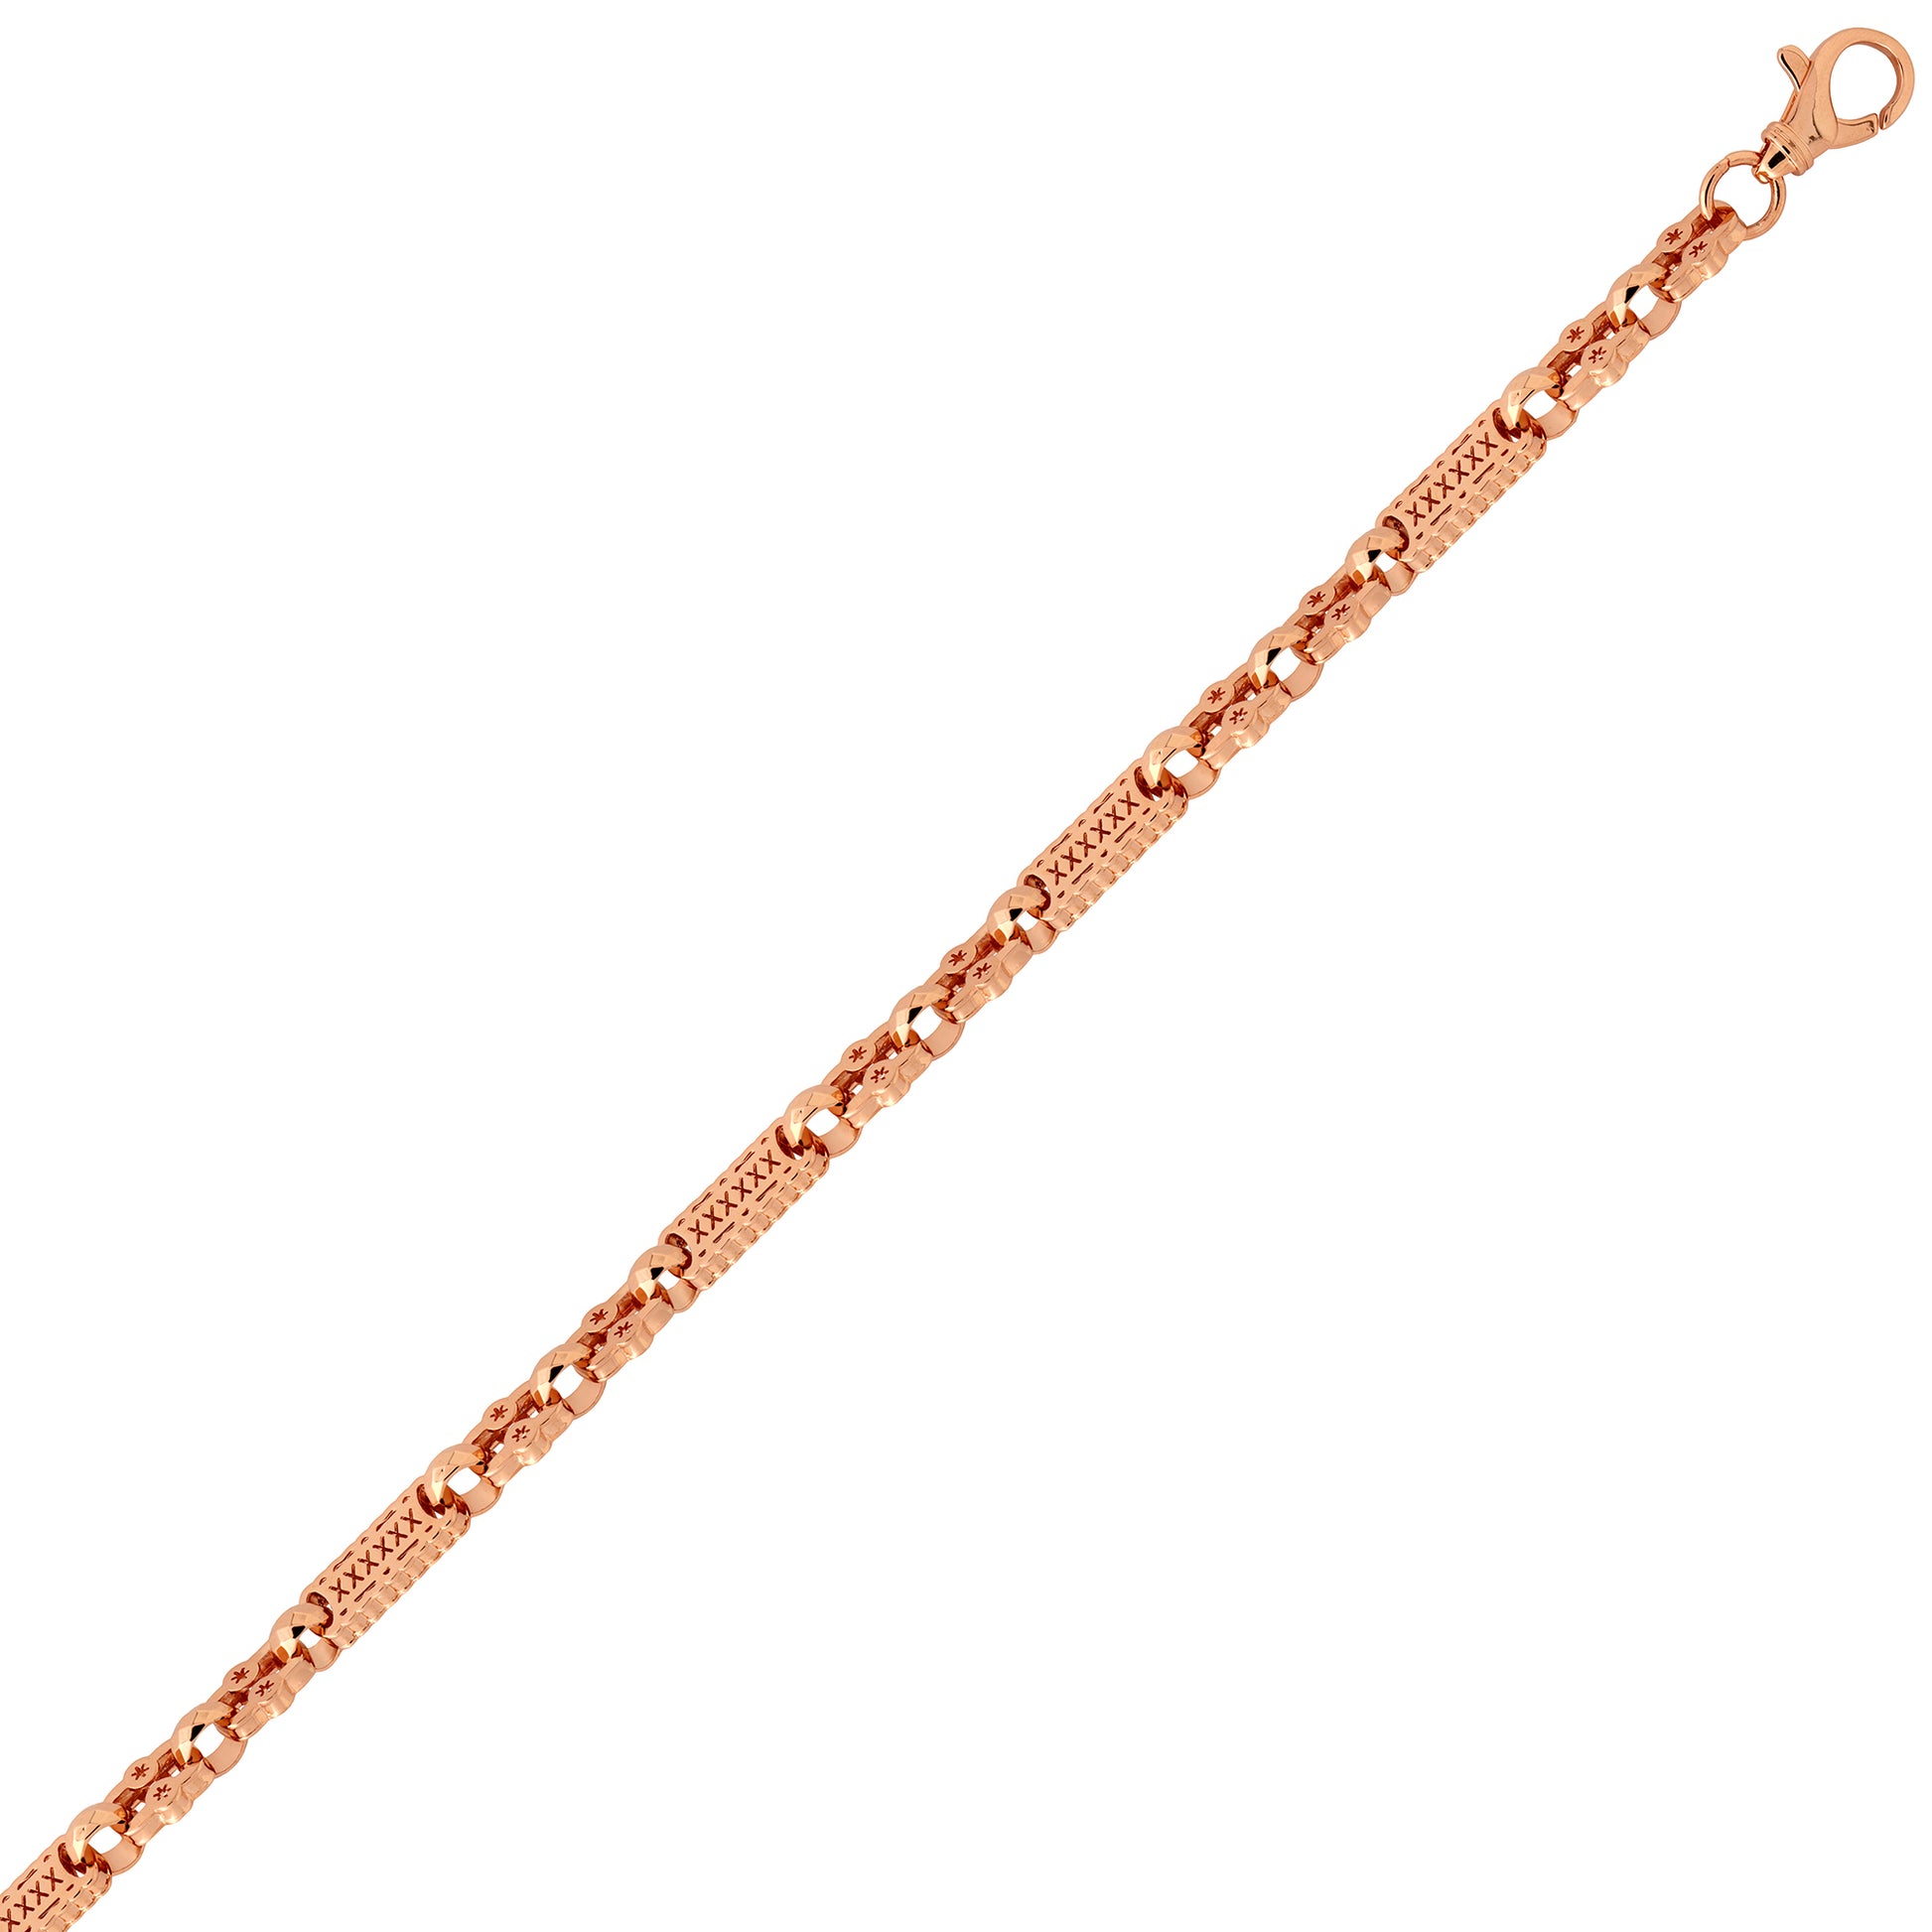 9ct Rose Gold  Rolling Stars & Bars 10mm Chain Link Necklace - JBB361